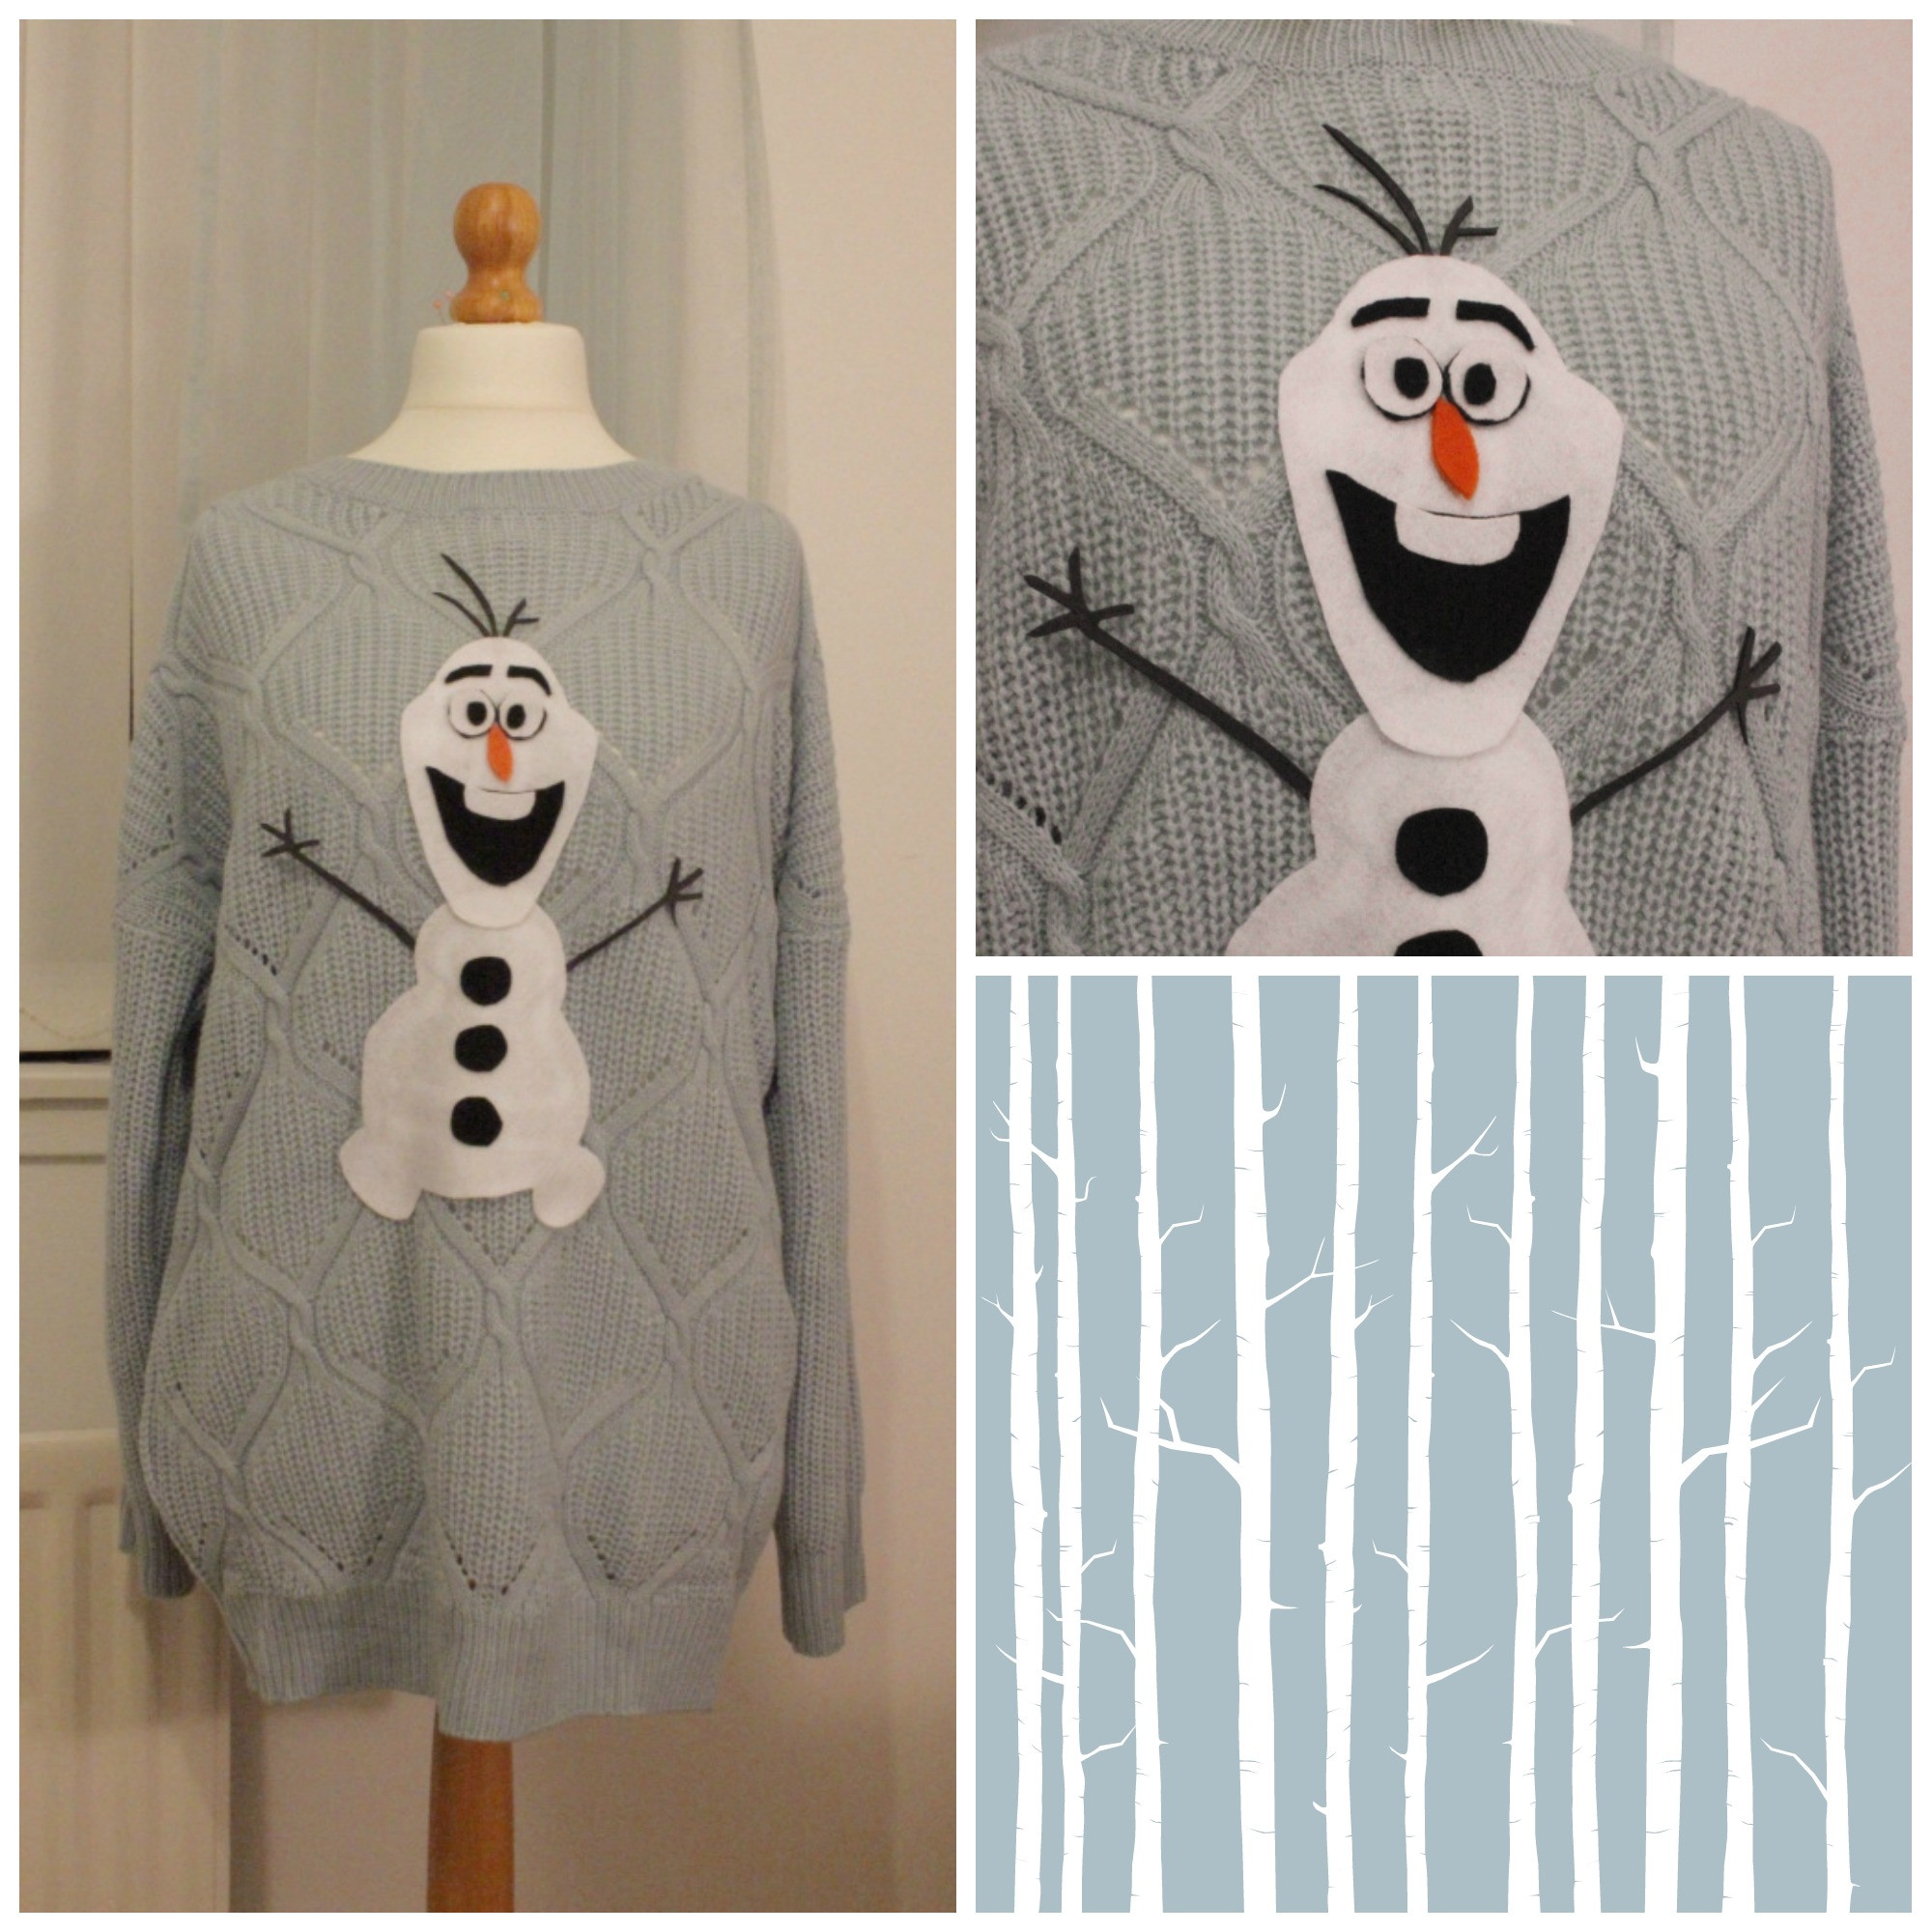 DIY Christmas Jumper
 8 Thrifty DIY Christmas Jumpers The Turtle Mat Blog – For